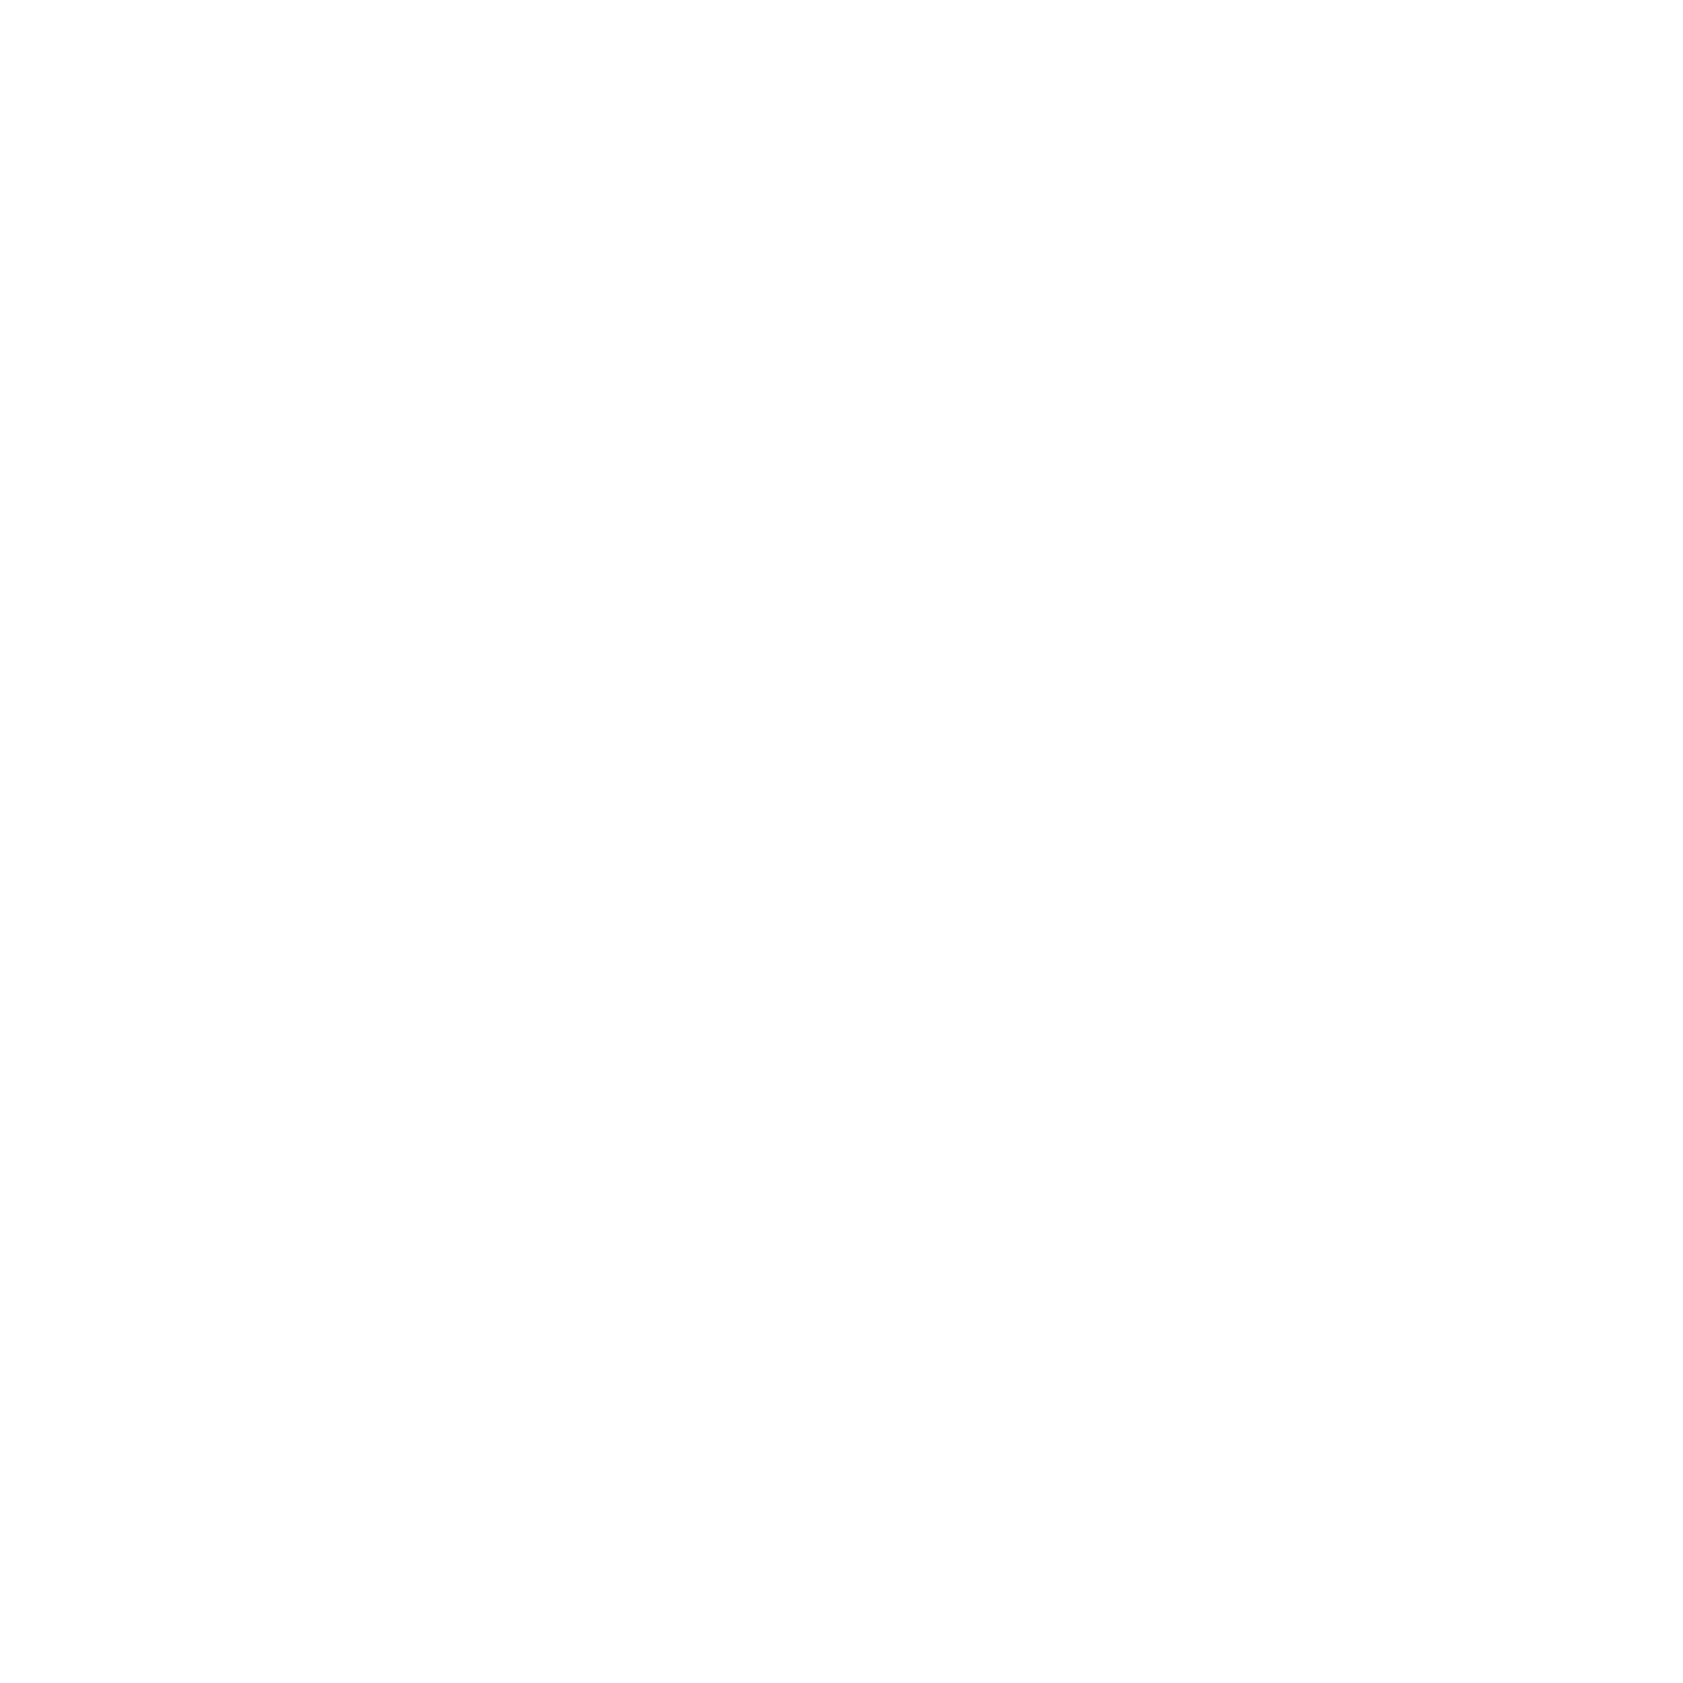 A pie chart section showing that 65% of the sales made from the Futue Heritage Fund go towards environmental initiatives.